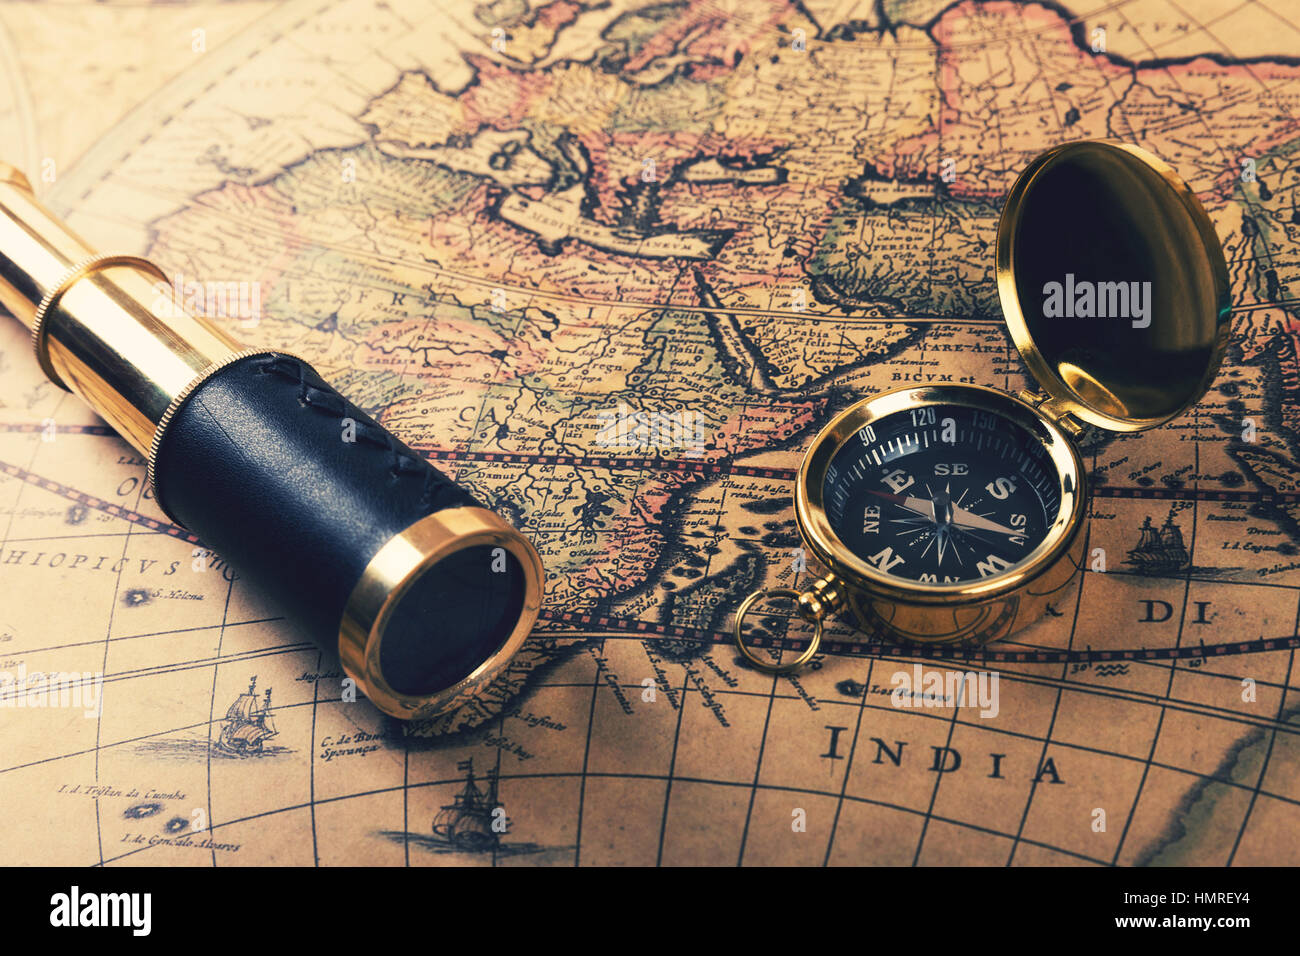 vintage compass and spyglass on old world map Stock Photo